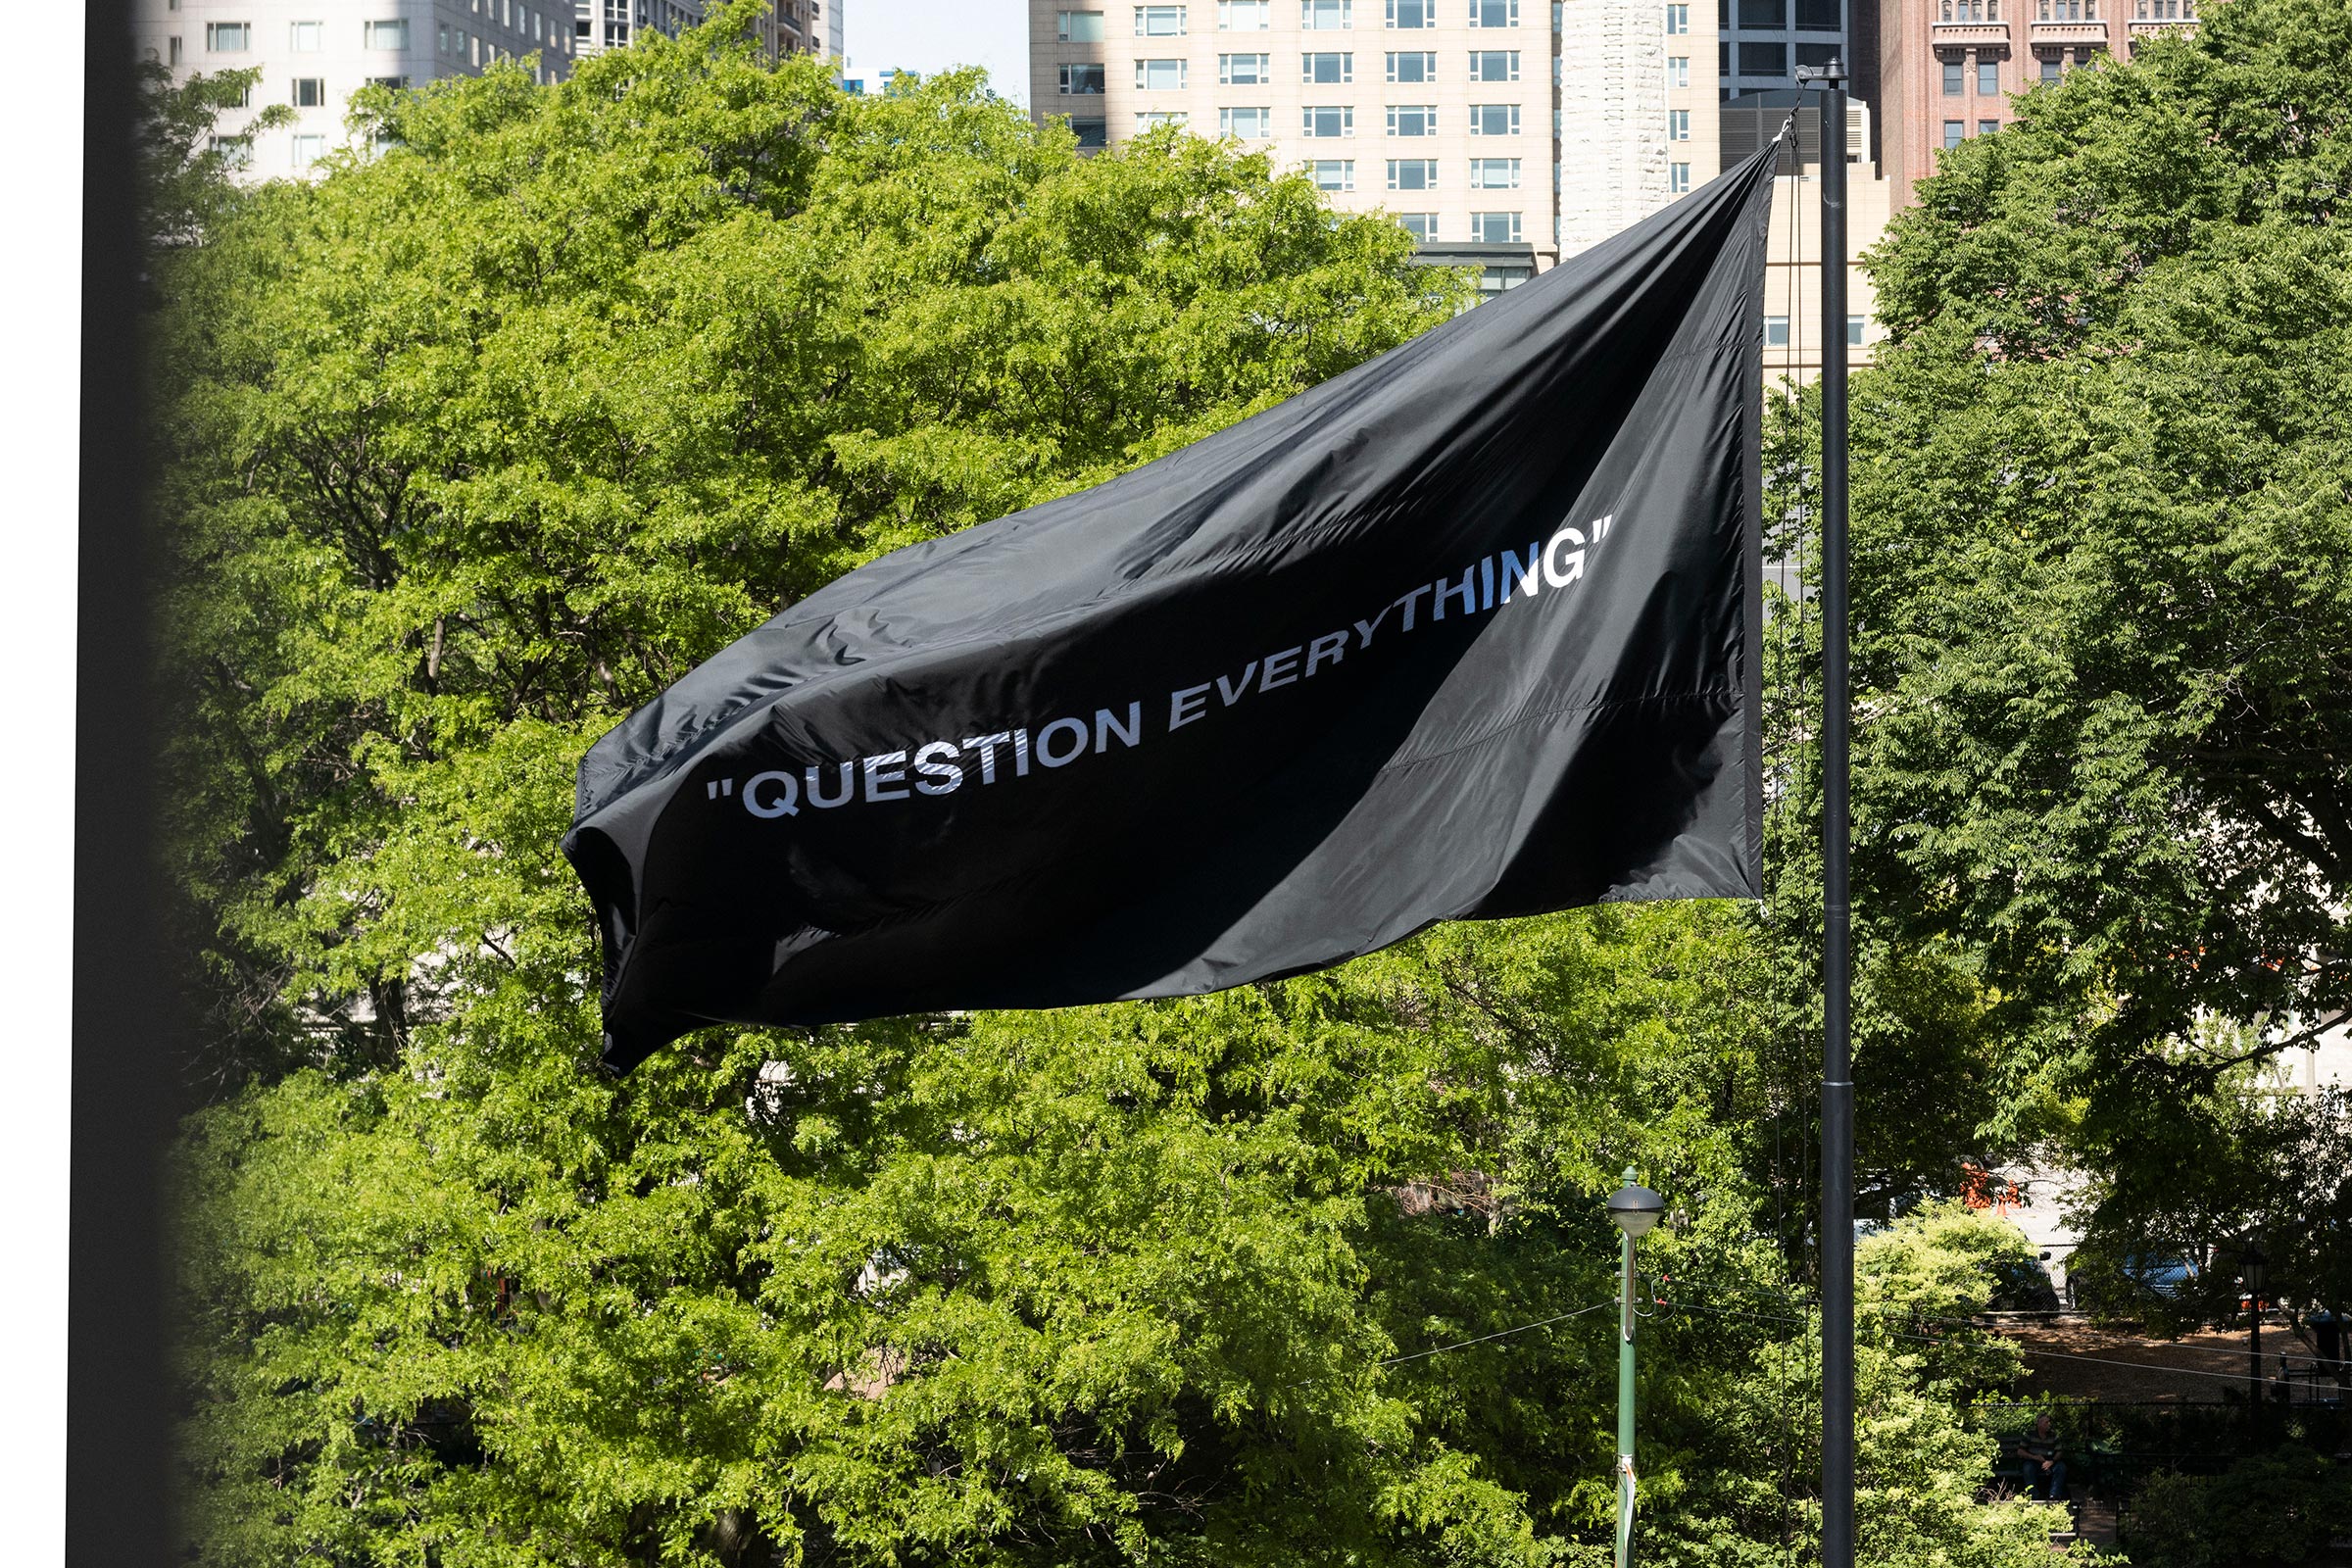 A flag titled “PSA” flies in front of the Museum of Contemporary Art in Chicago as part of the 2019 exhibit. (Courtesy of Gymnastics Art Institute &amp; Virgil Abloh Securities/)